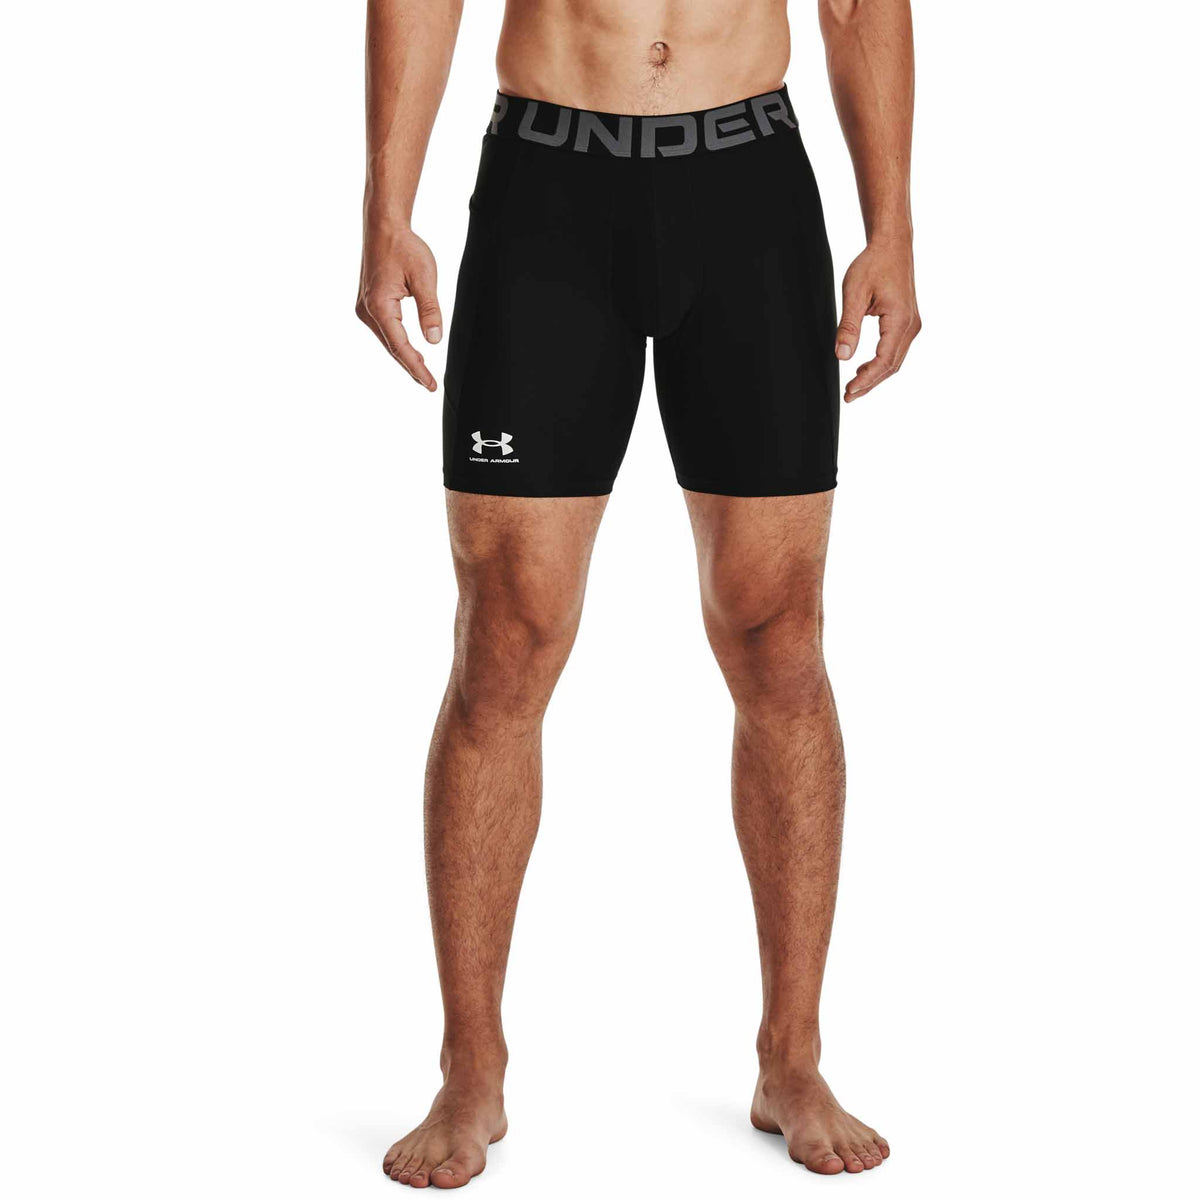 Under Armour HeatGear Coolswitch Armour Compression Shorts